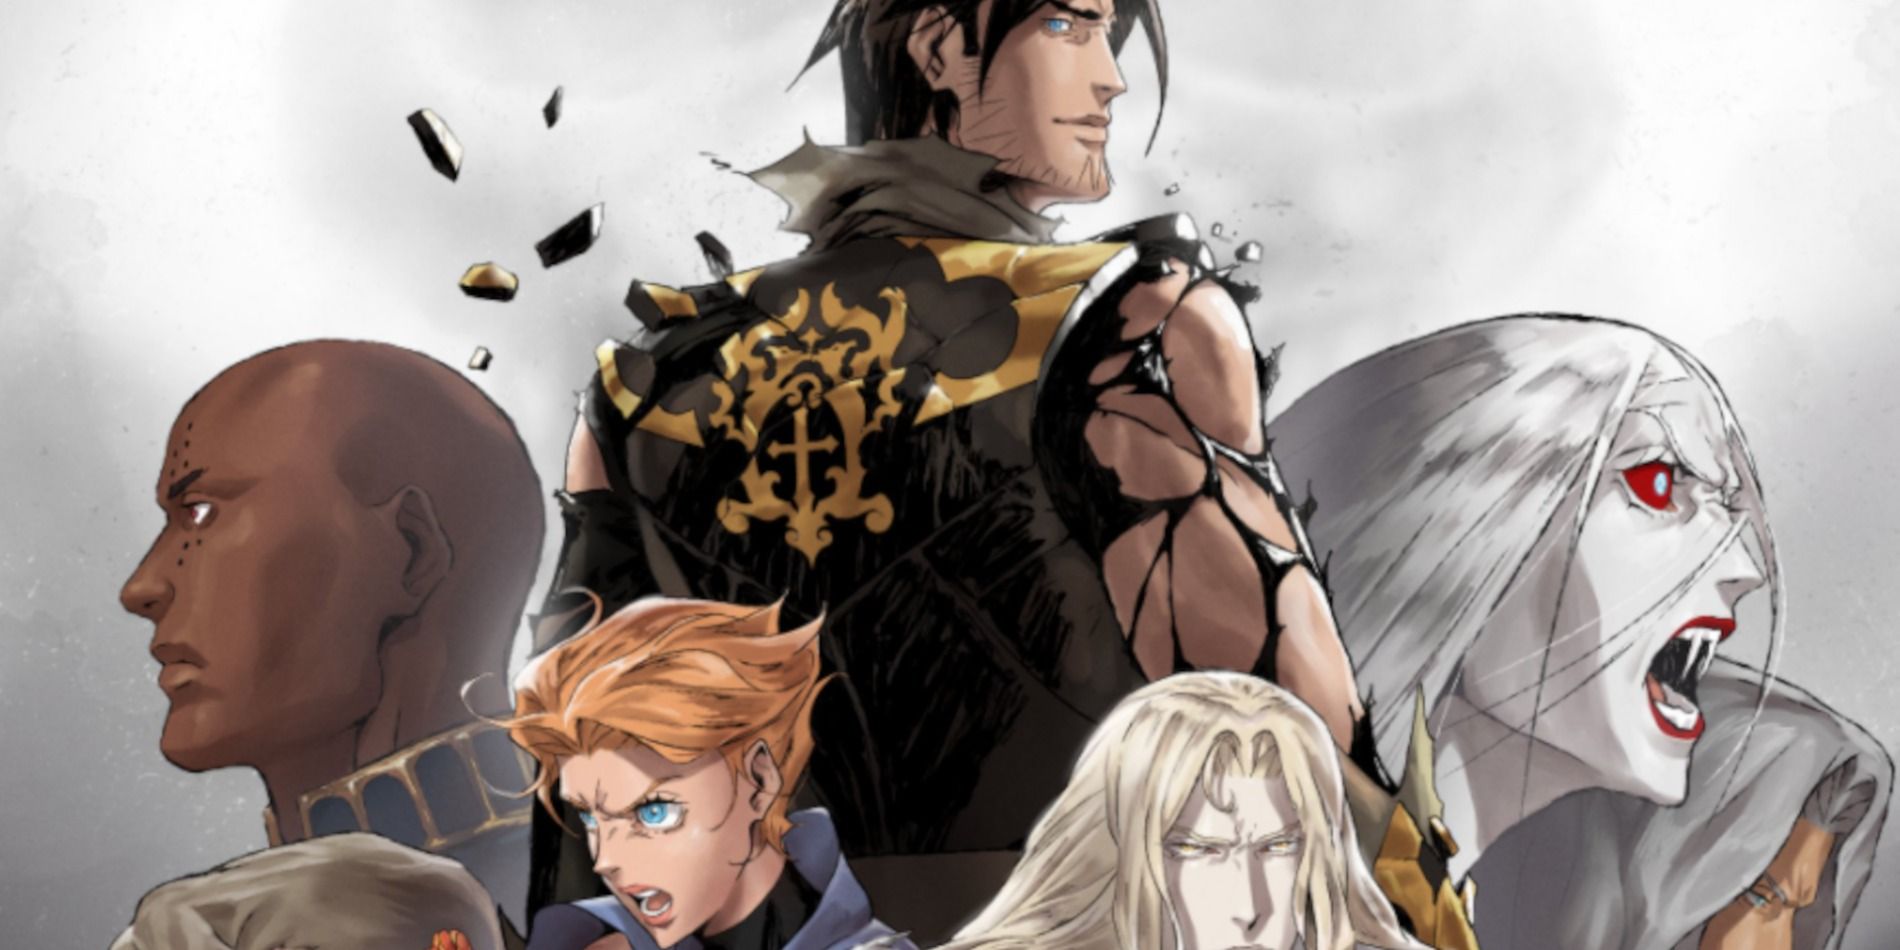 Characters from the upcoming fourth season of the Castlevania Netflix anime.